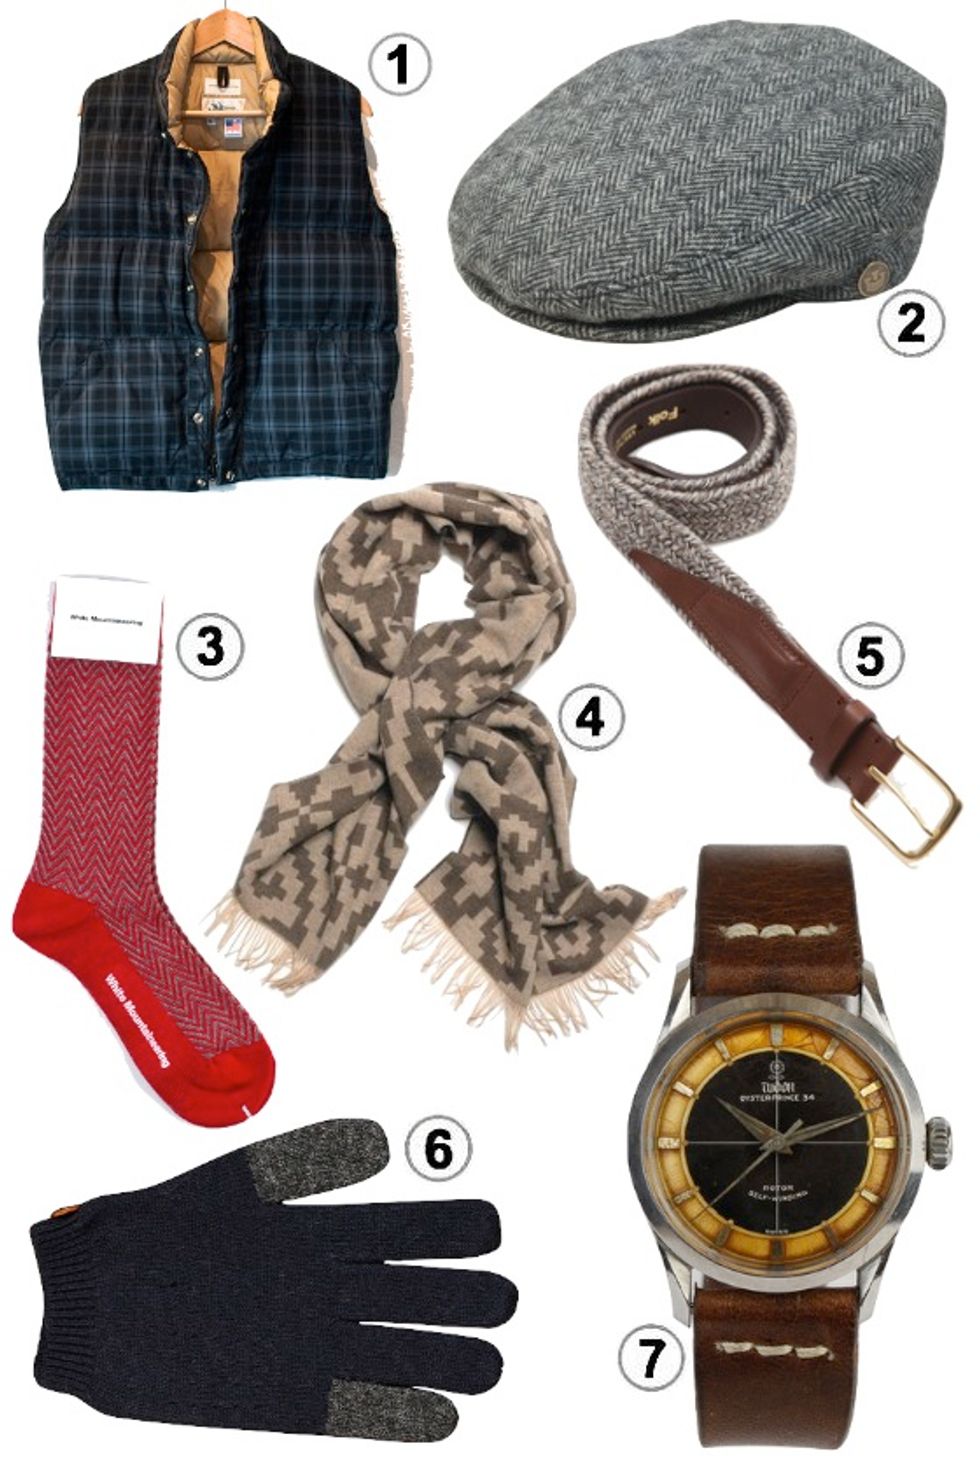 Look of the Week: Men's Winter Accessories from Local Boutiques